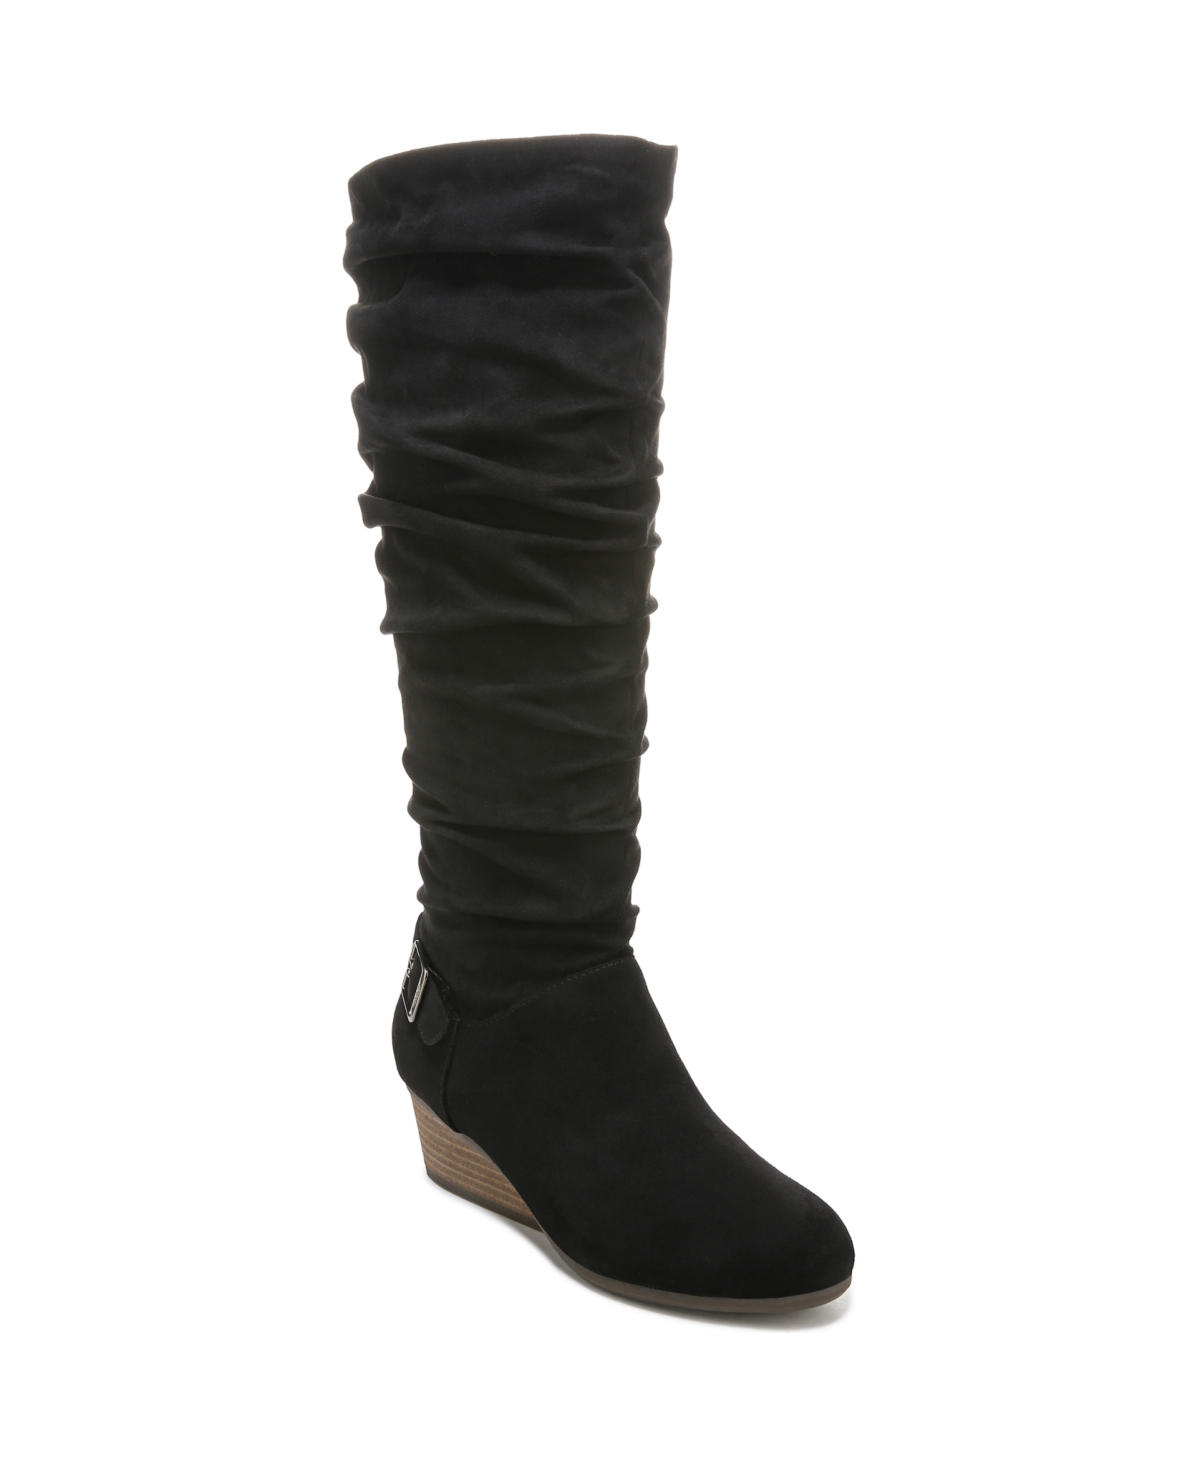 UPC 736715605901 product image for Dr. Scholl's Women's Break Free High Shaft Boots Women's Shoes | upcitemdb.com